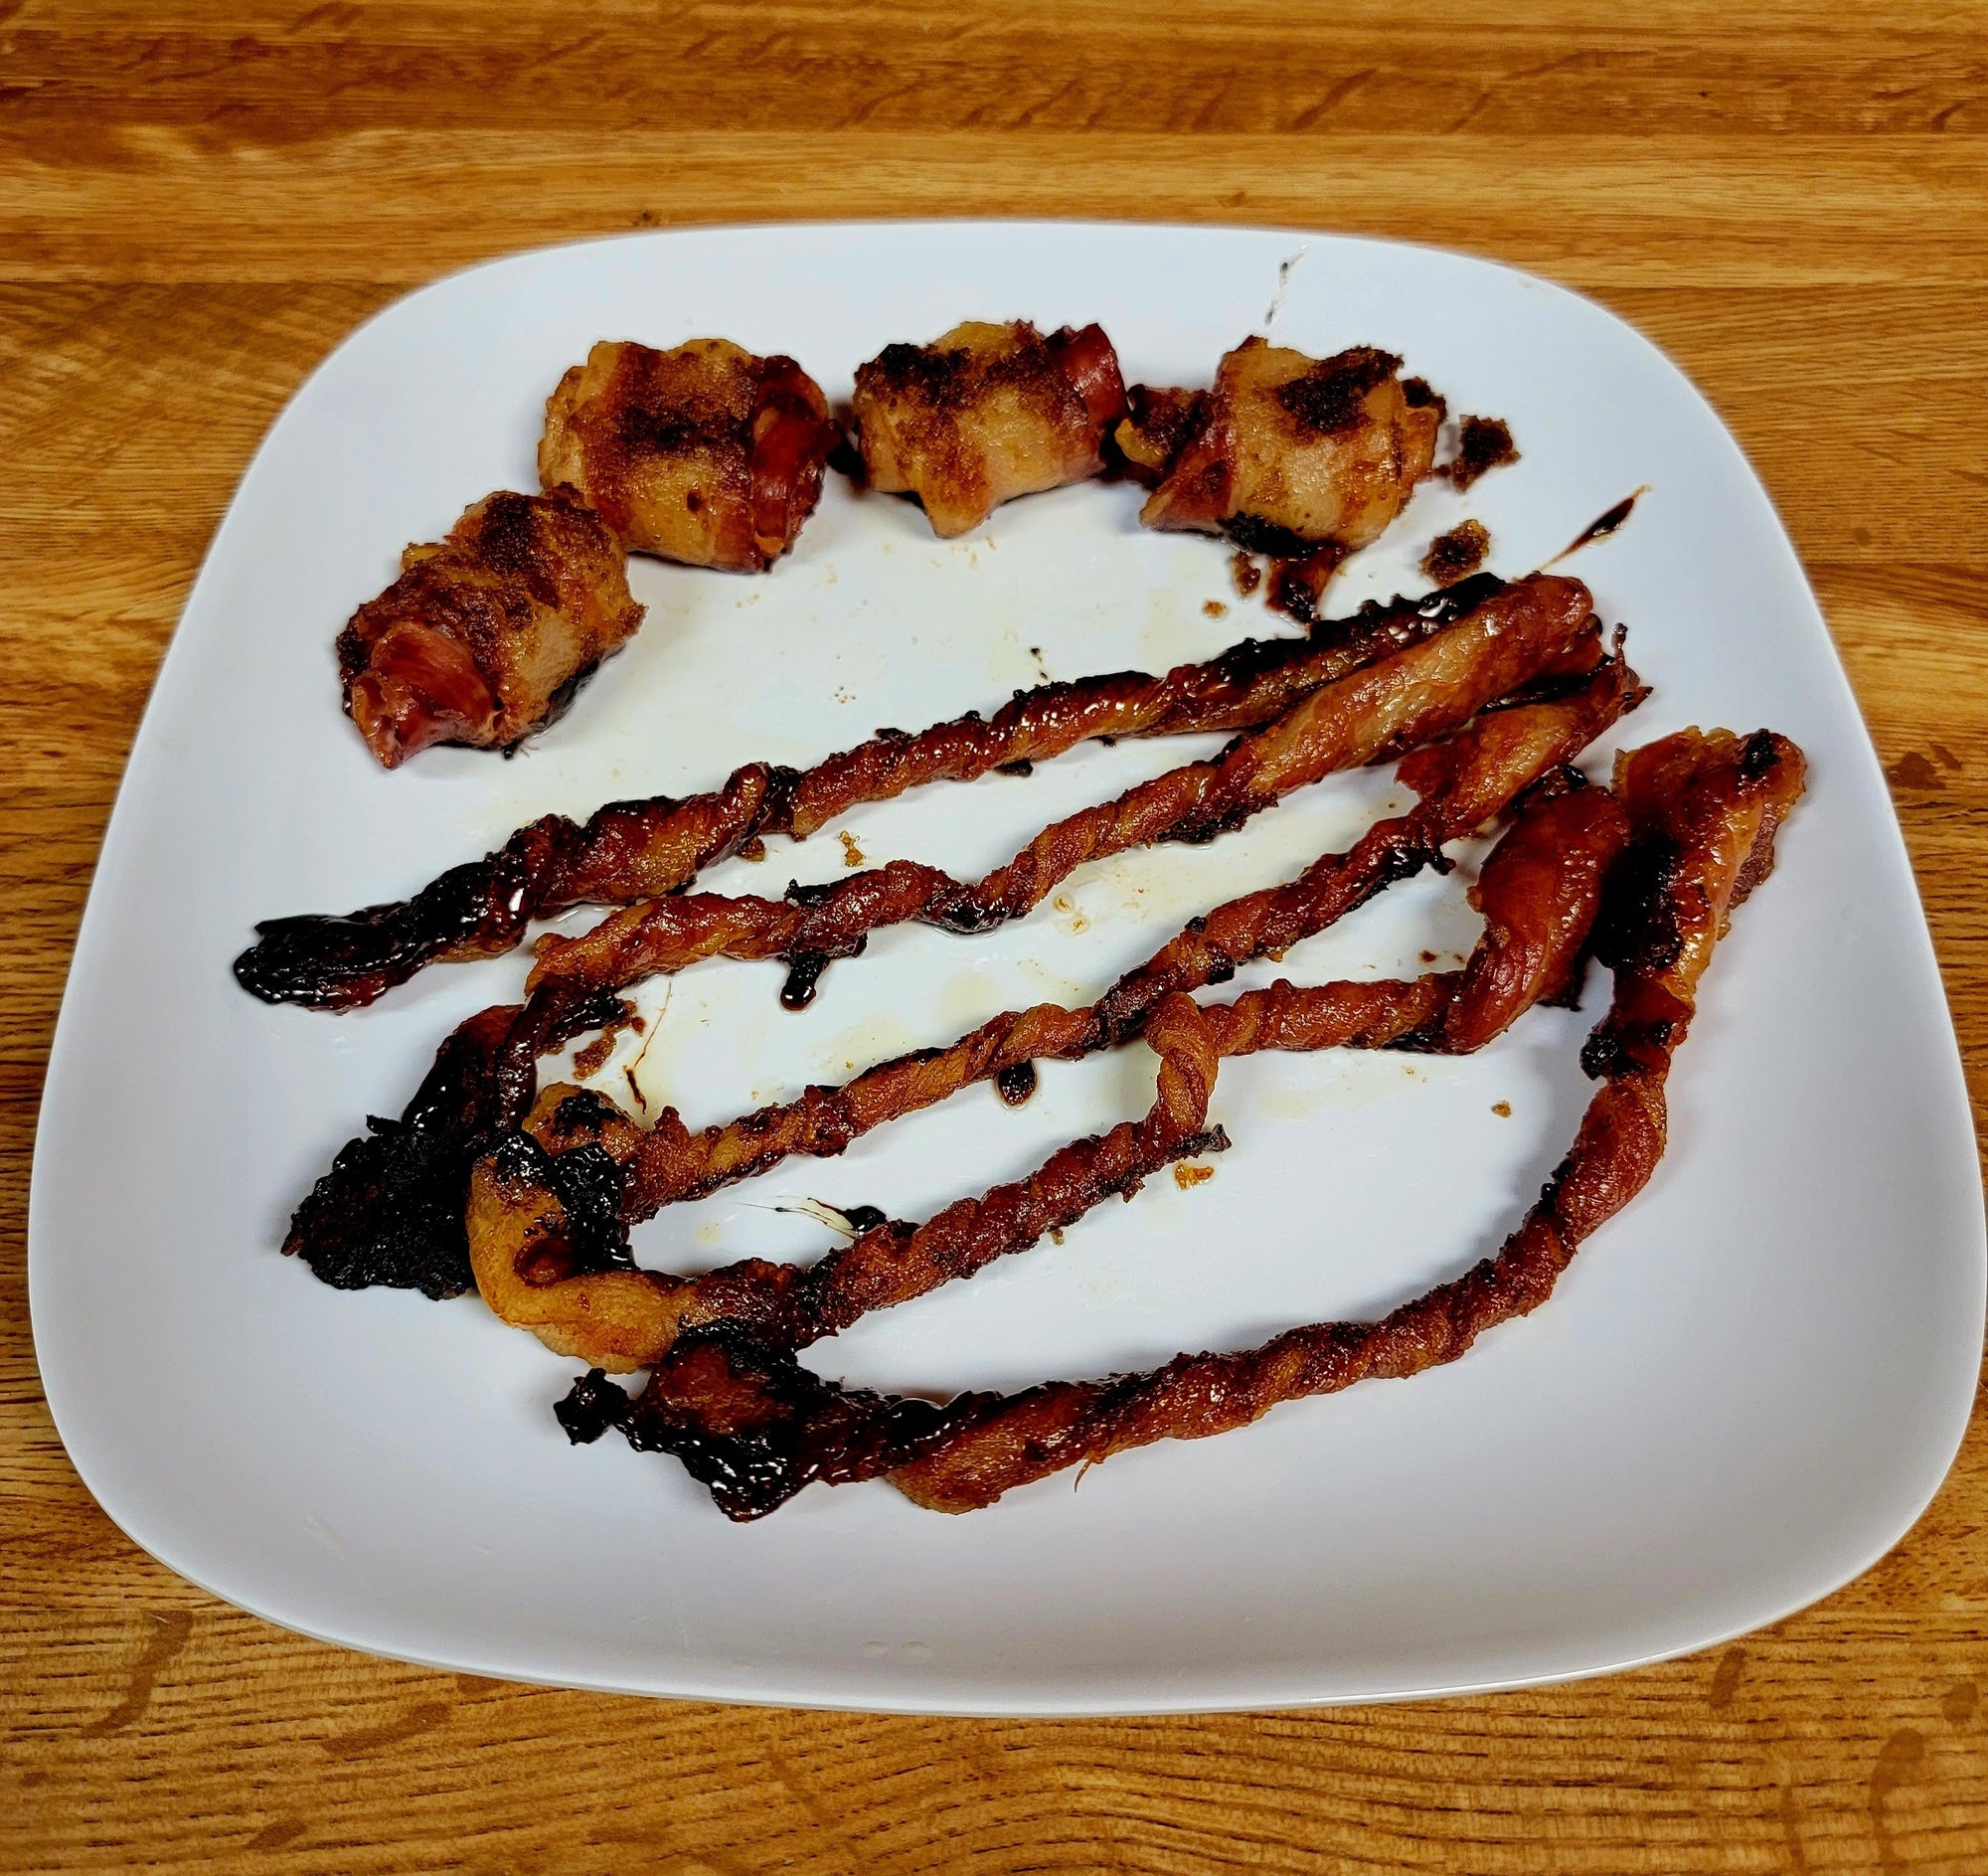 Bright Leaf Candied Twisted Bacon and Sugar Bellies